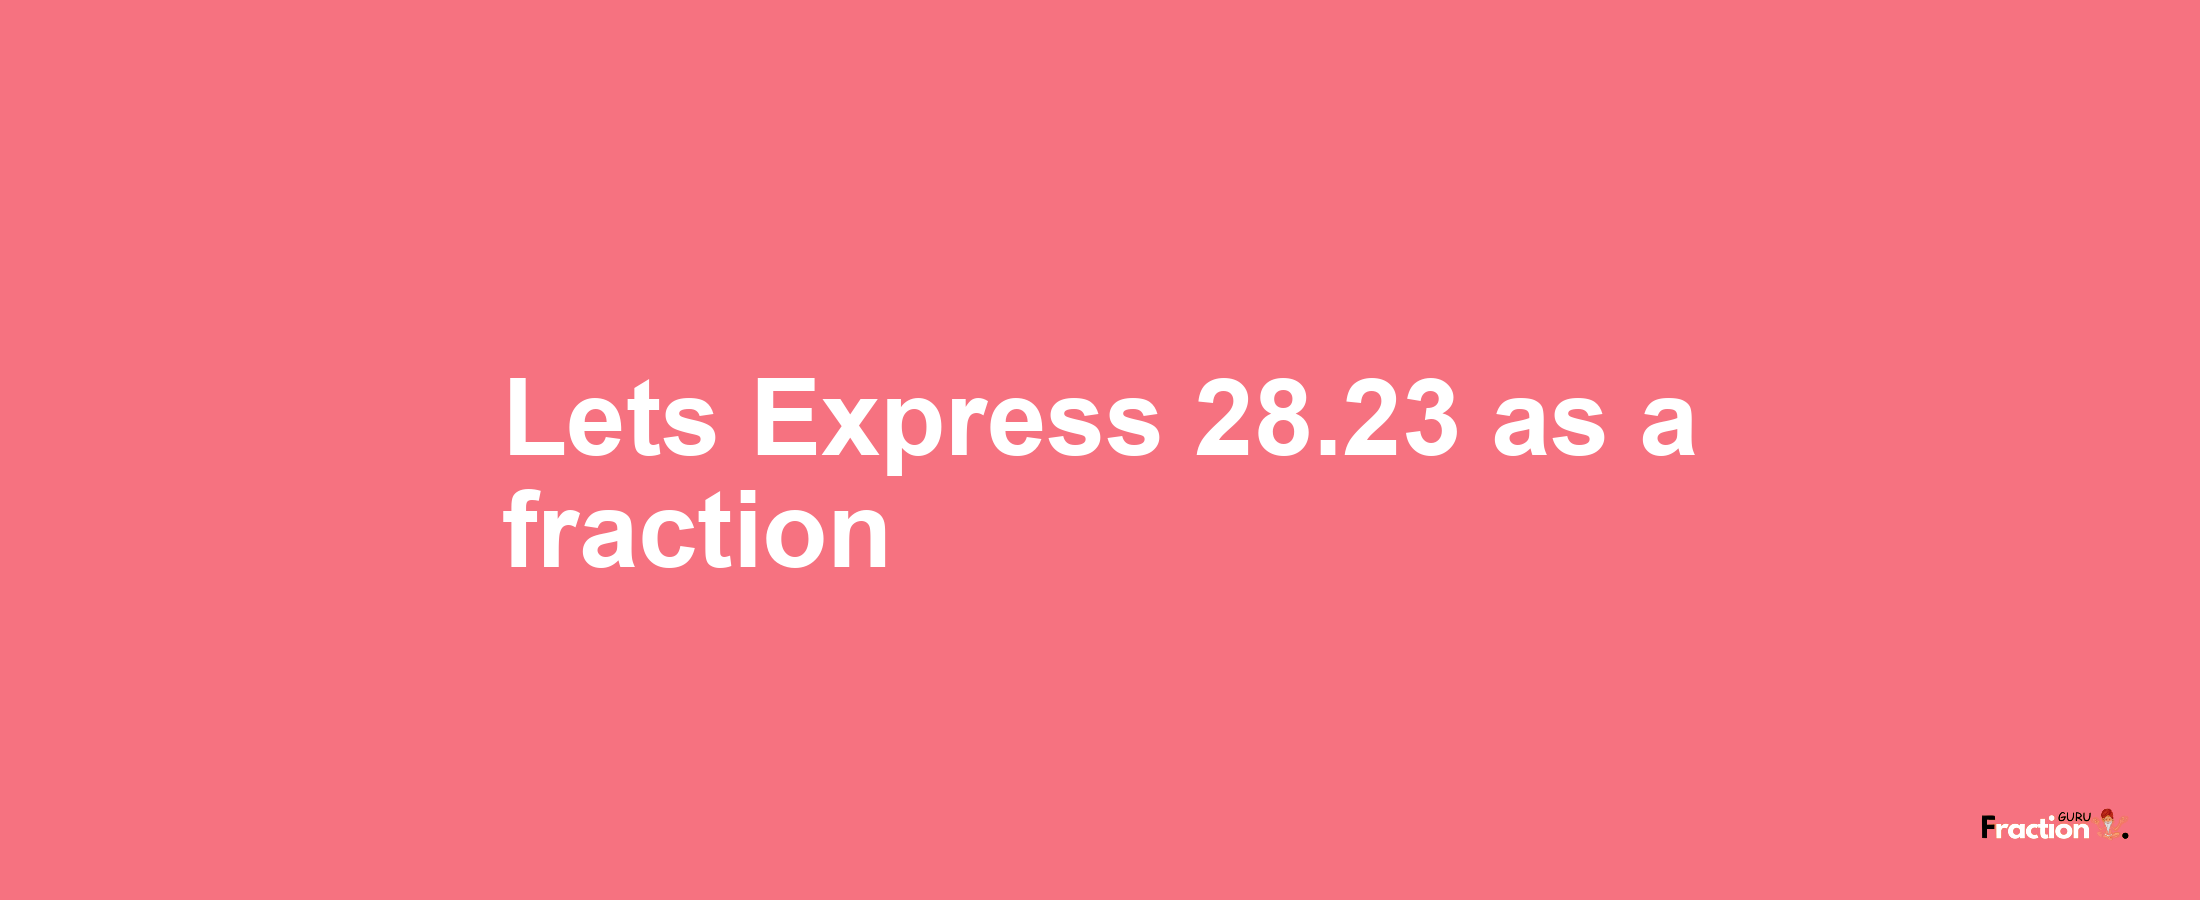 Lets Express 28.23 as afraction